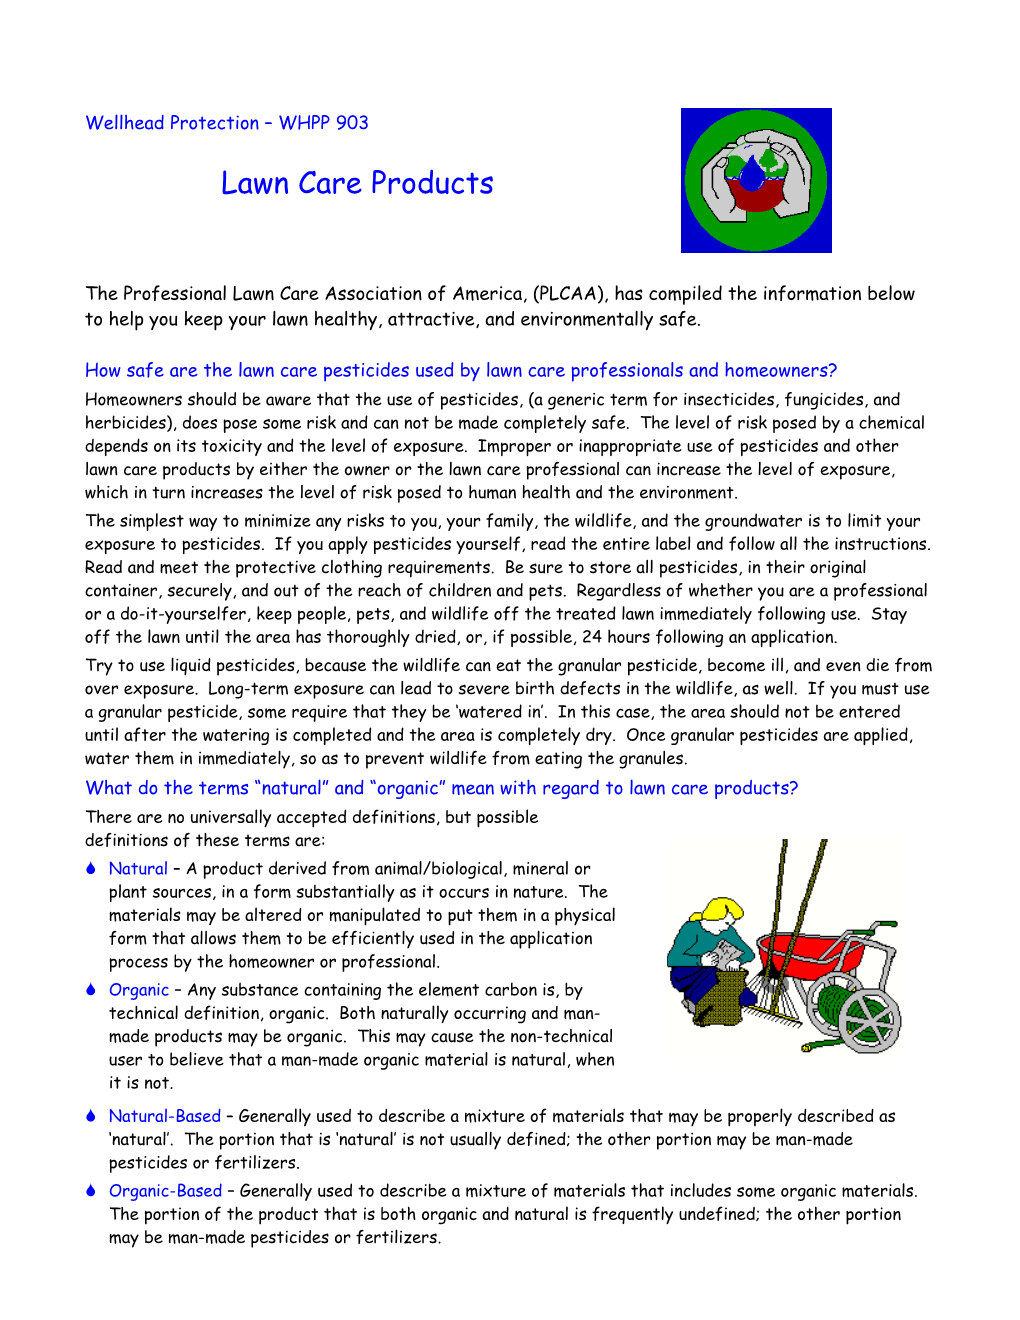 How Safe Are the Lawn Care Pesticides Used by Lawn Care Professionals and Homeowners?